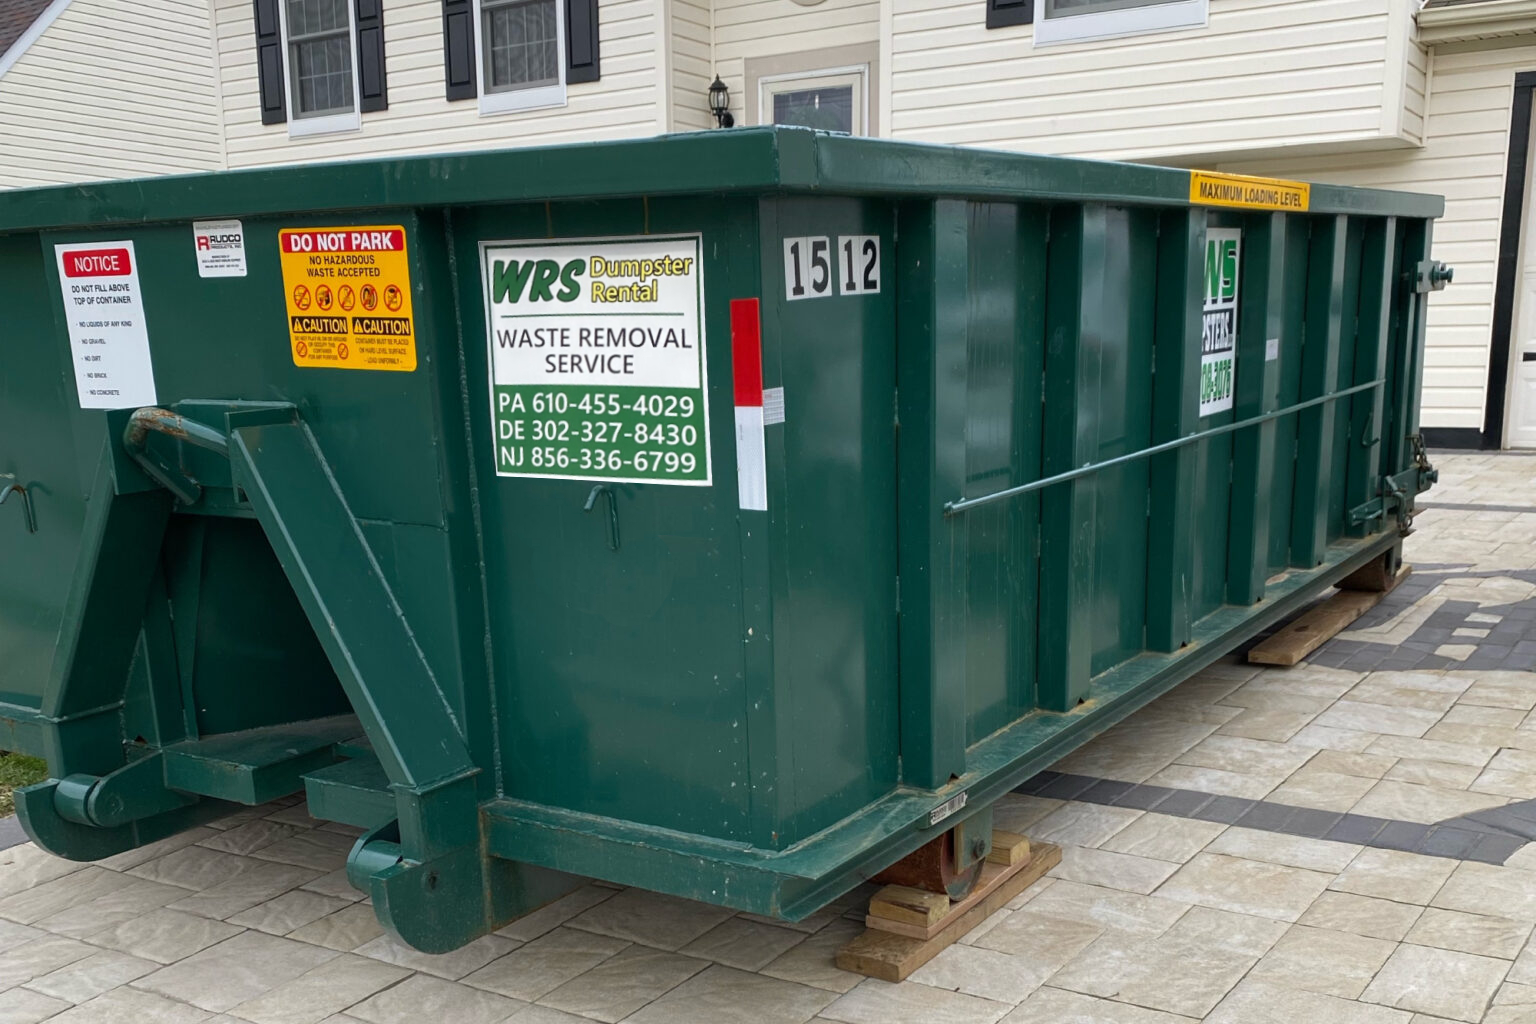 Responsible Waste Management in Allentown, PA